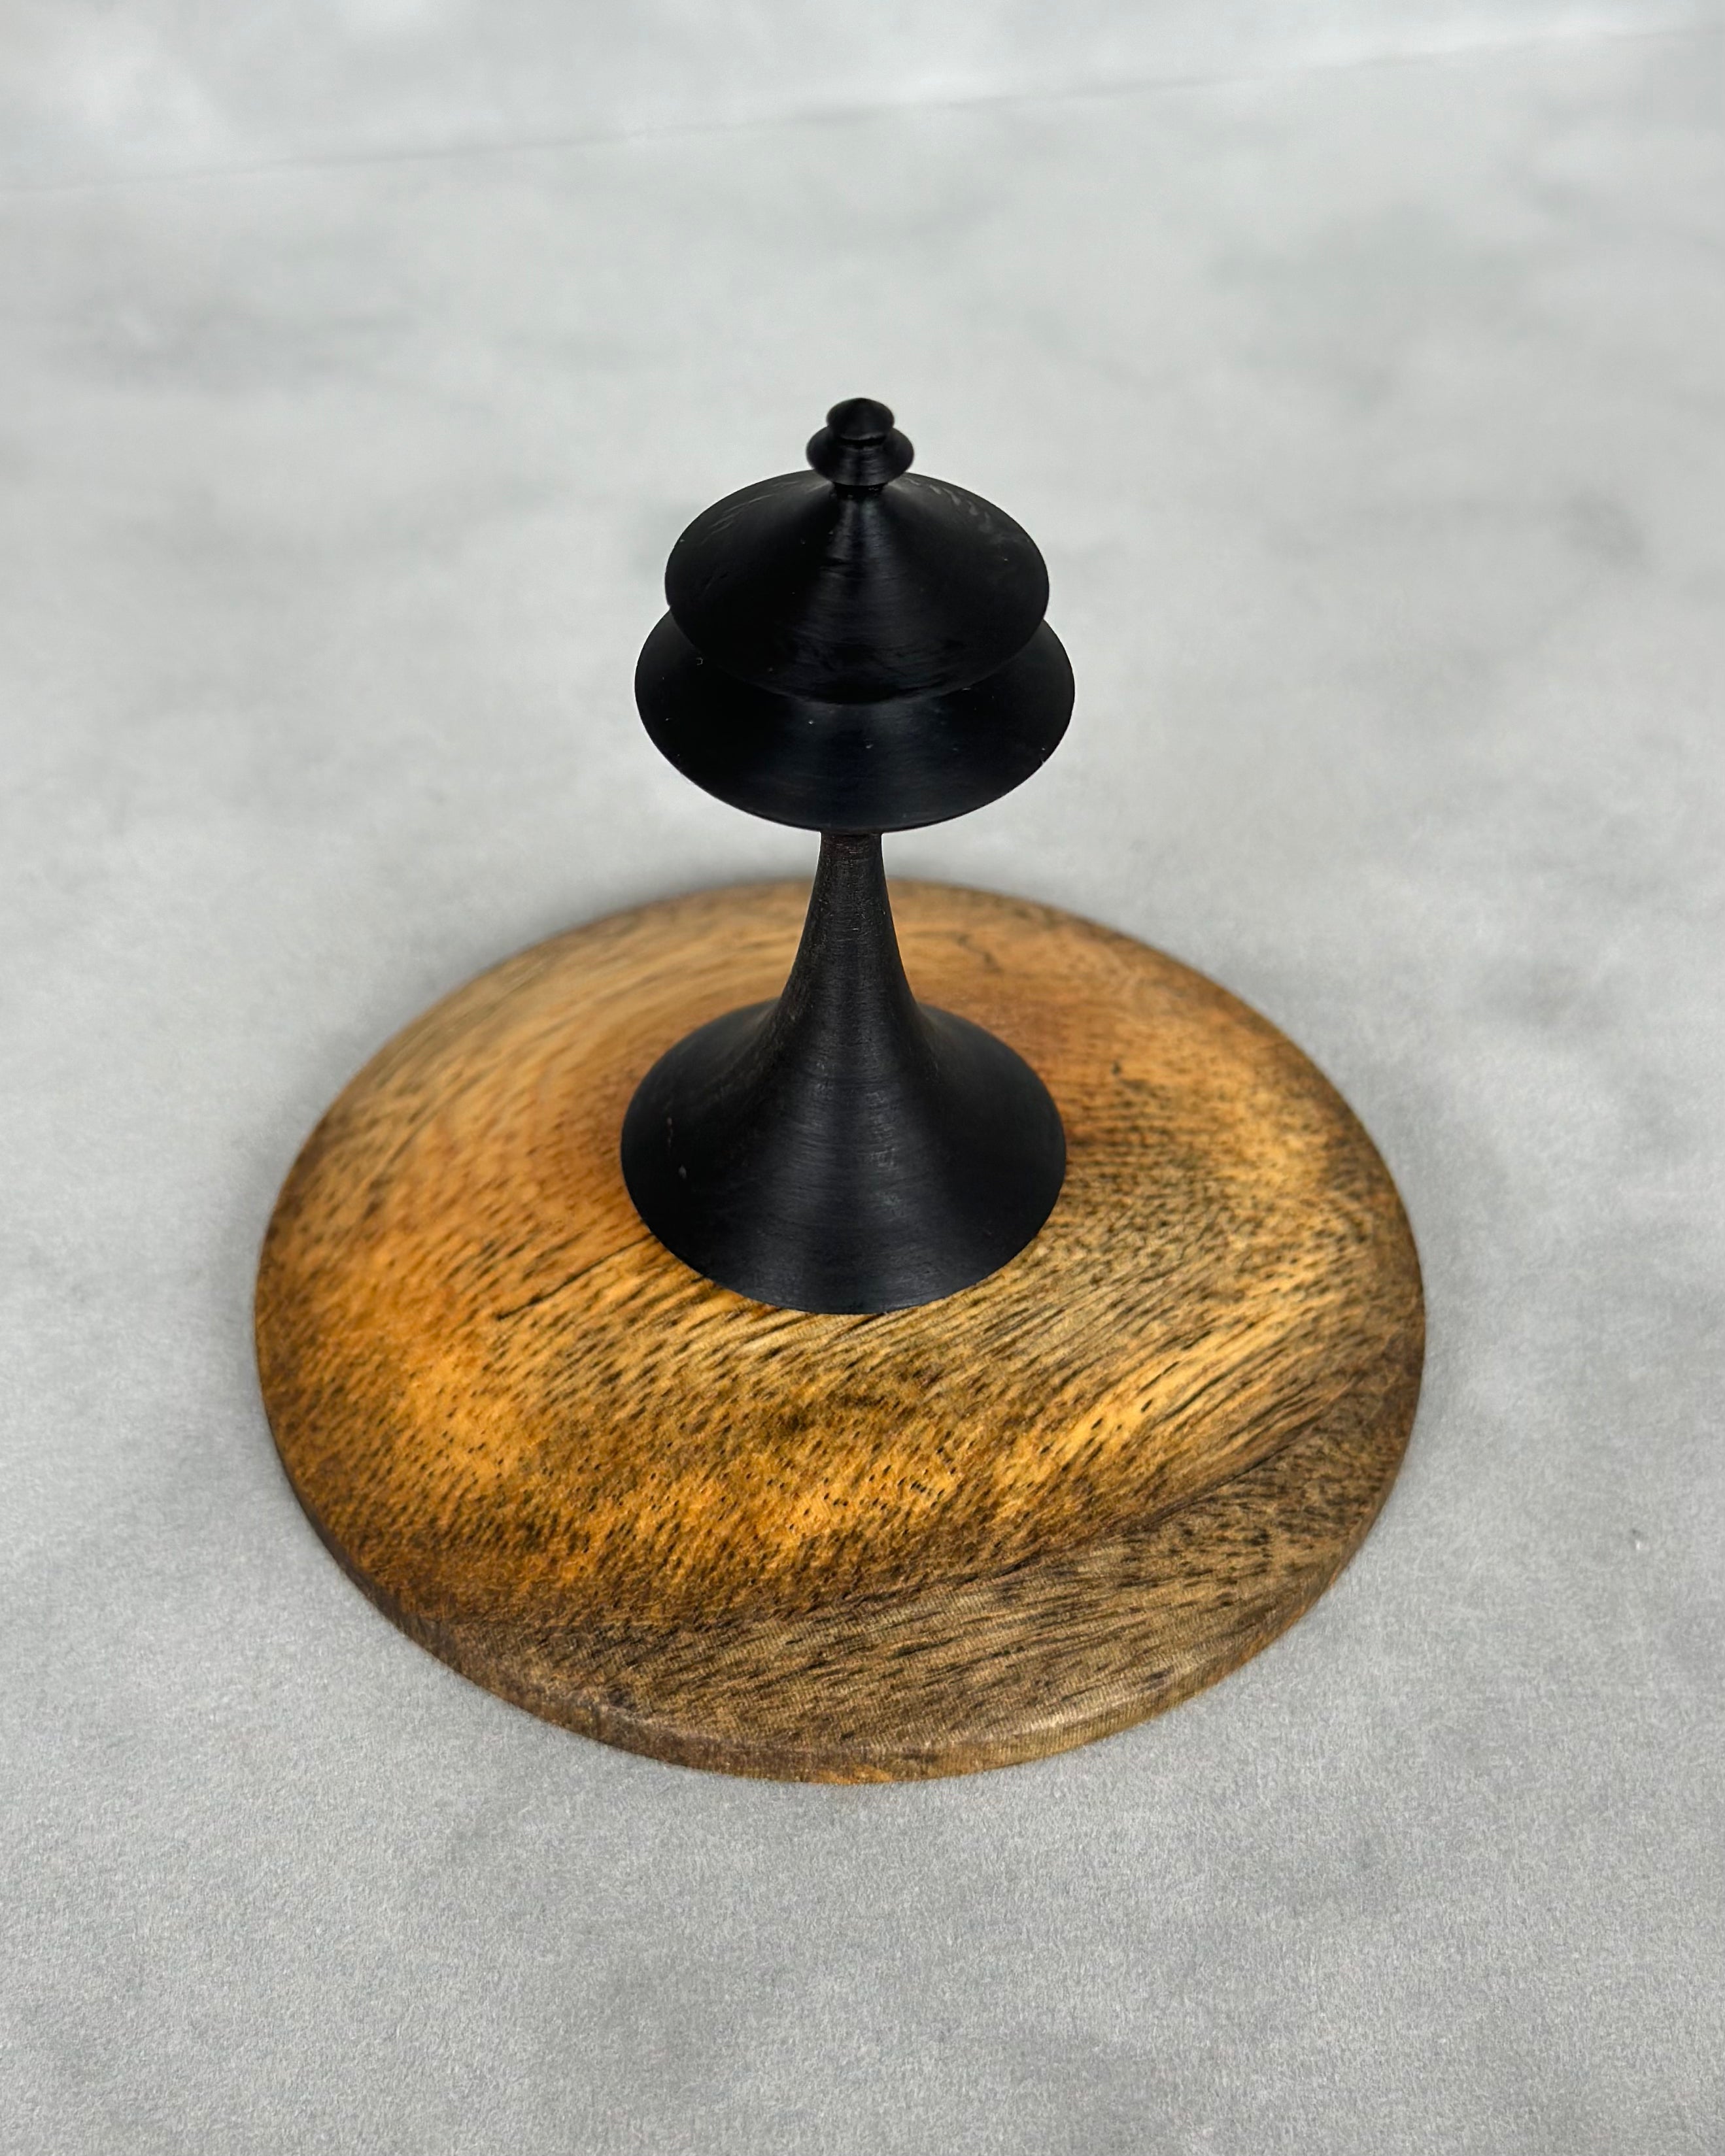 Figured Maple Hollow Form with African Blackwood Lid and Finial